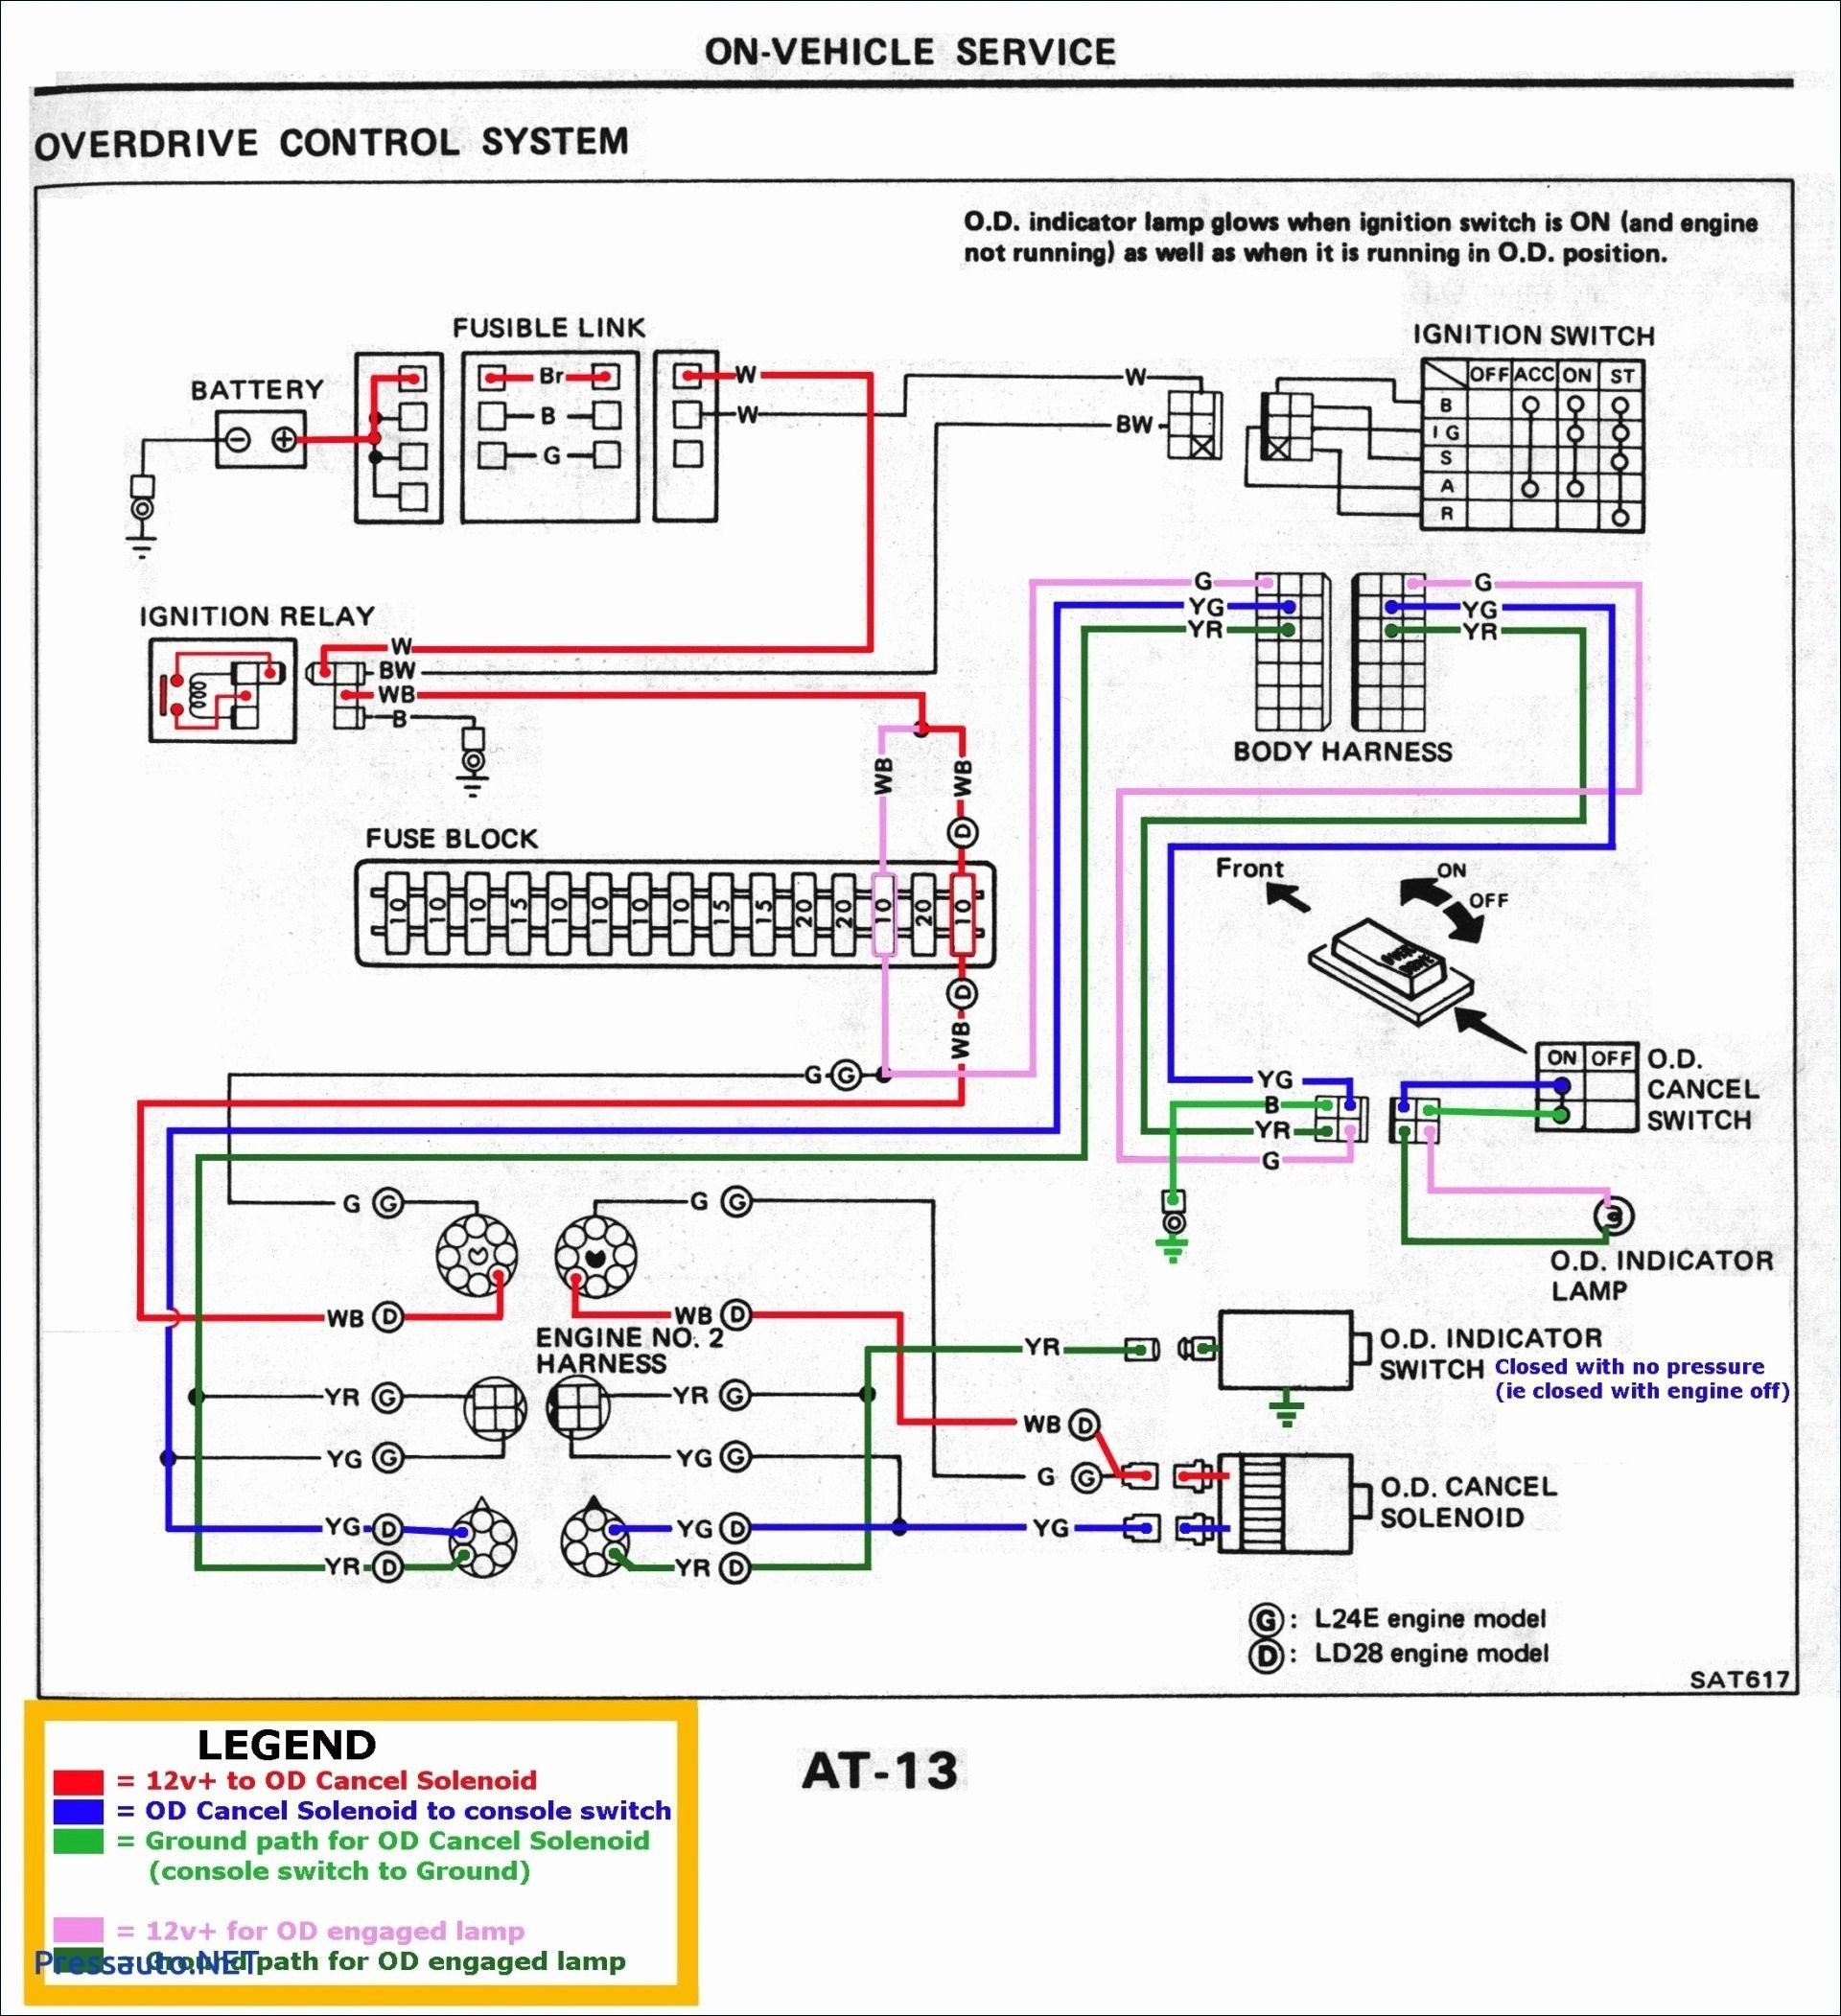 Saab 93 Stereo Wiring Bl 7979] Wire Gm 4 Wire Gm Alternator Wiring Diagram Of Saab 93 Stereo Wiring